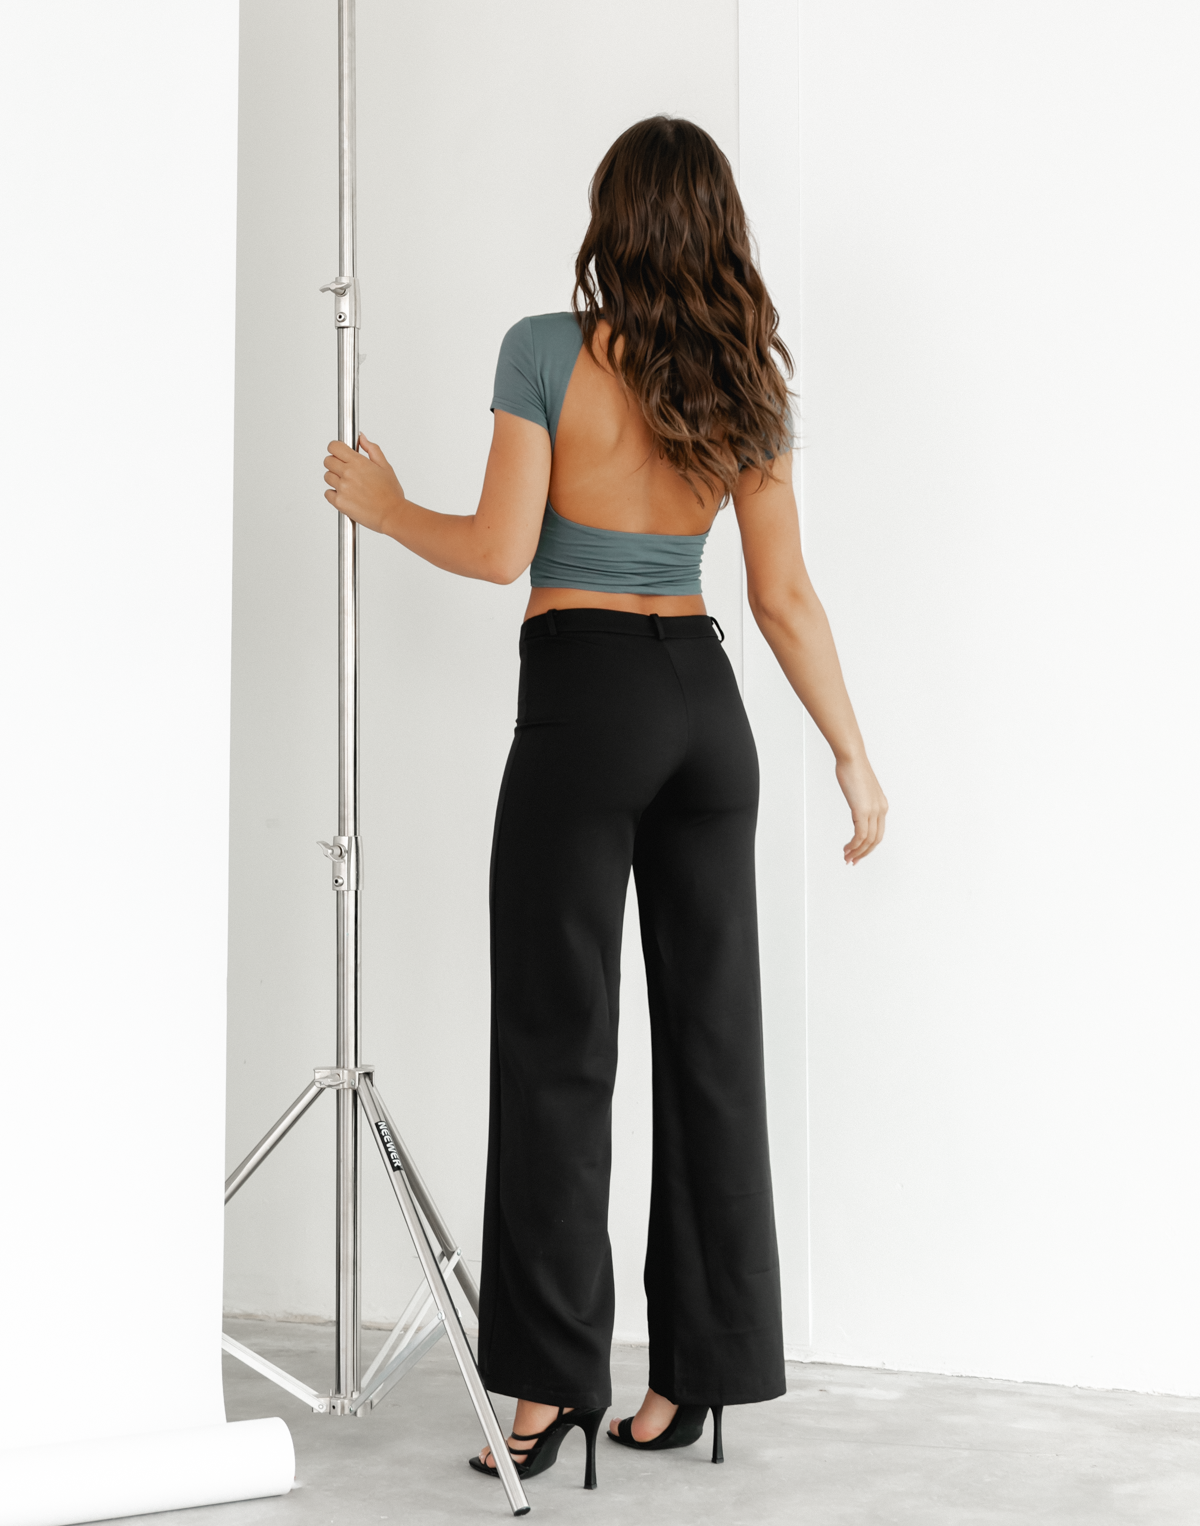 Trouble Backless Top (Teal) - Teal Backless Crop Top - Women's Top - Charcoal Clothing